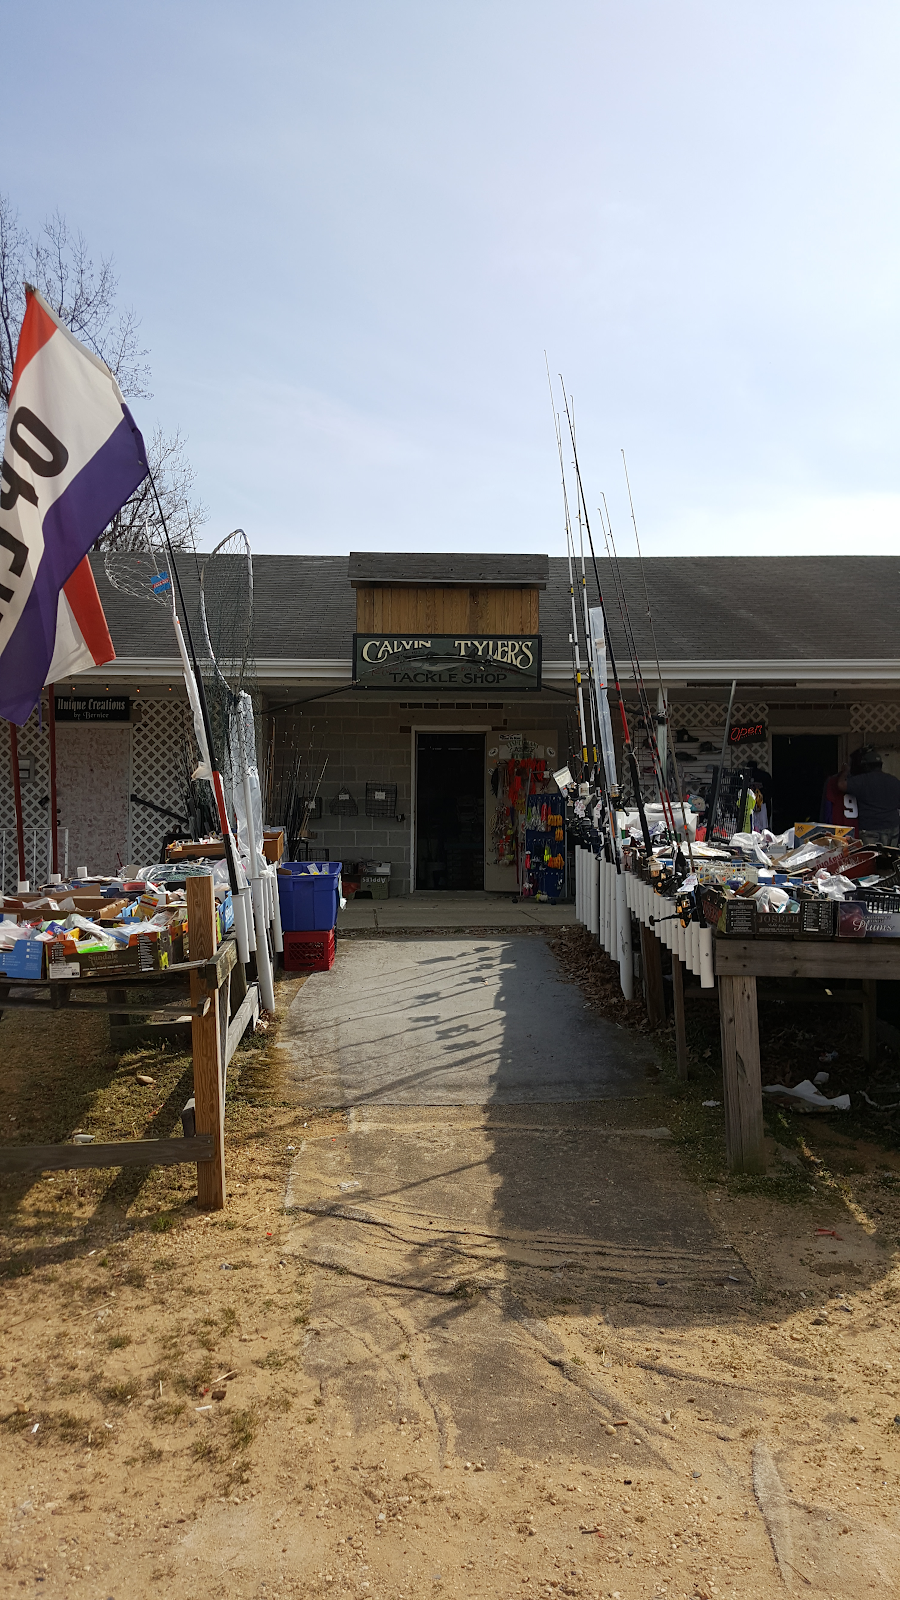 Tammys Tackle "Home of Calvin Tylers Tackle Shop | 29890 Three Notch Rd, Charlotte Hall, MD 20622 | Phone: (301) 503-0195